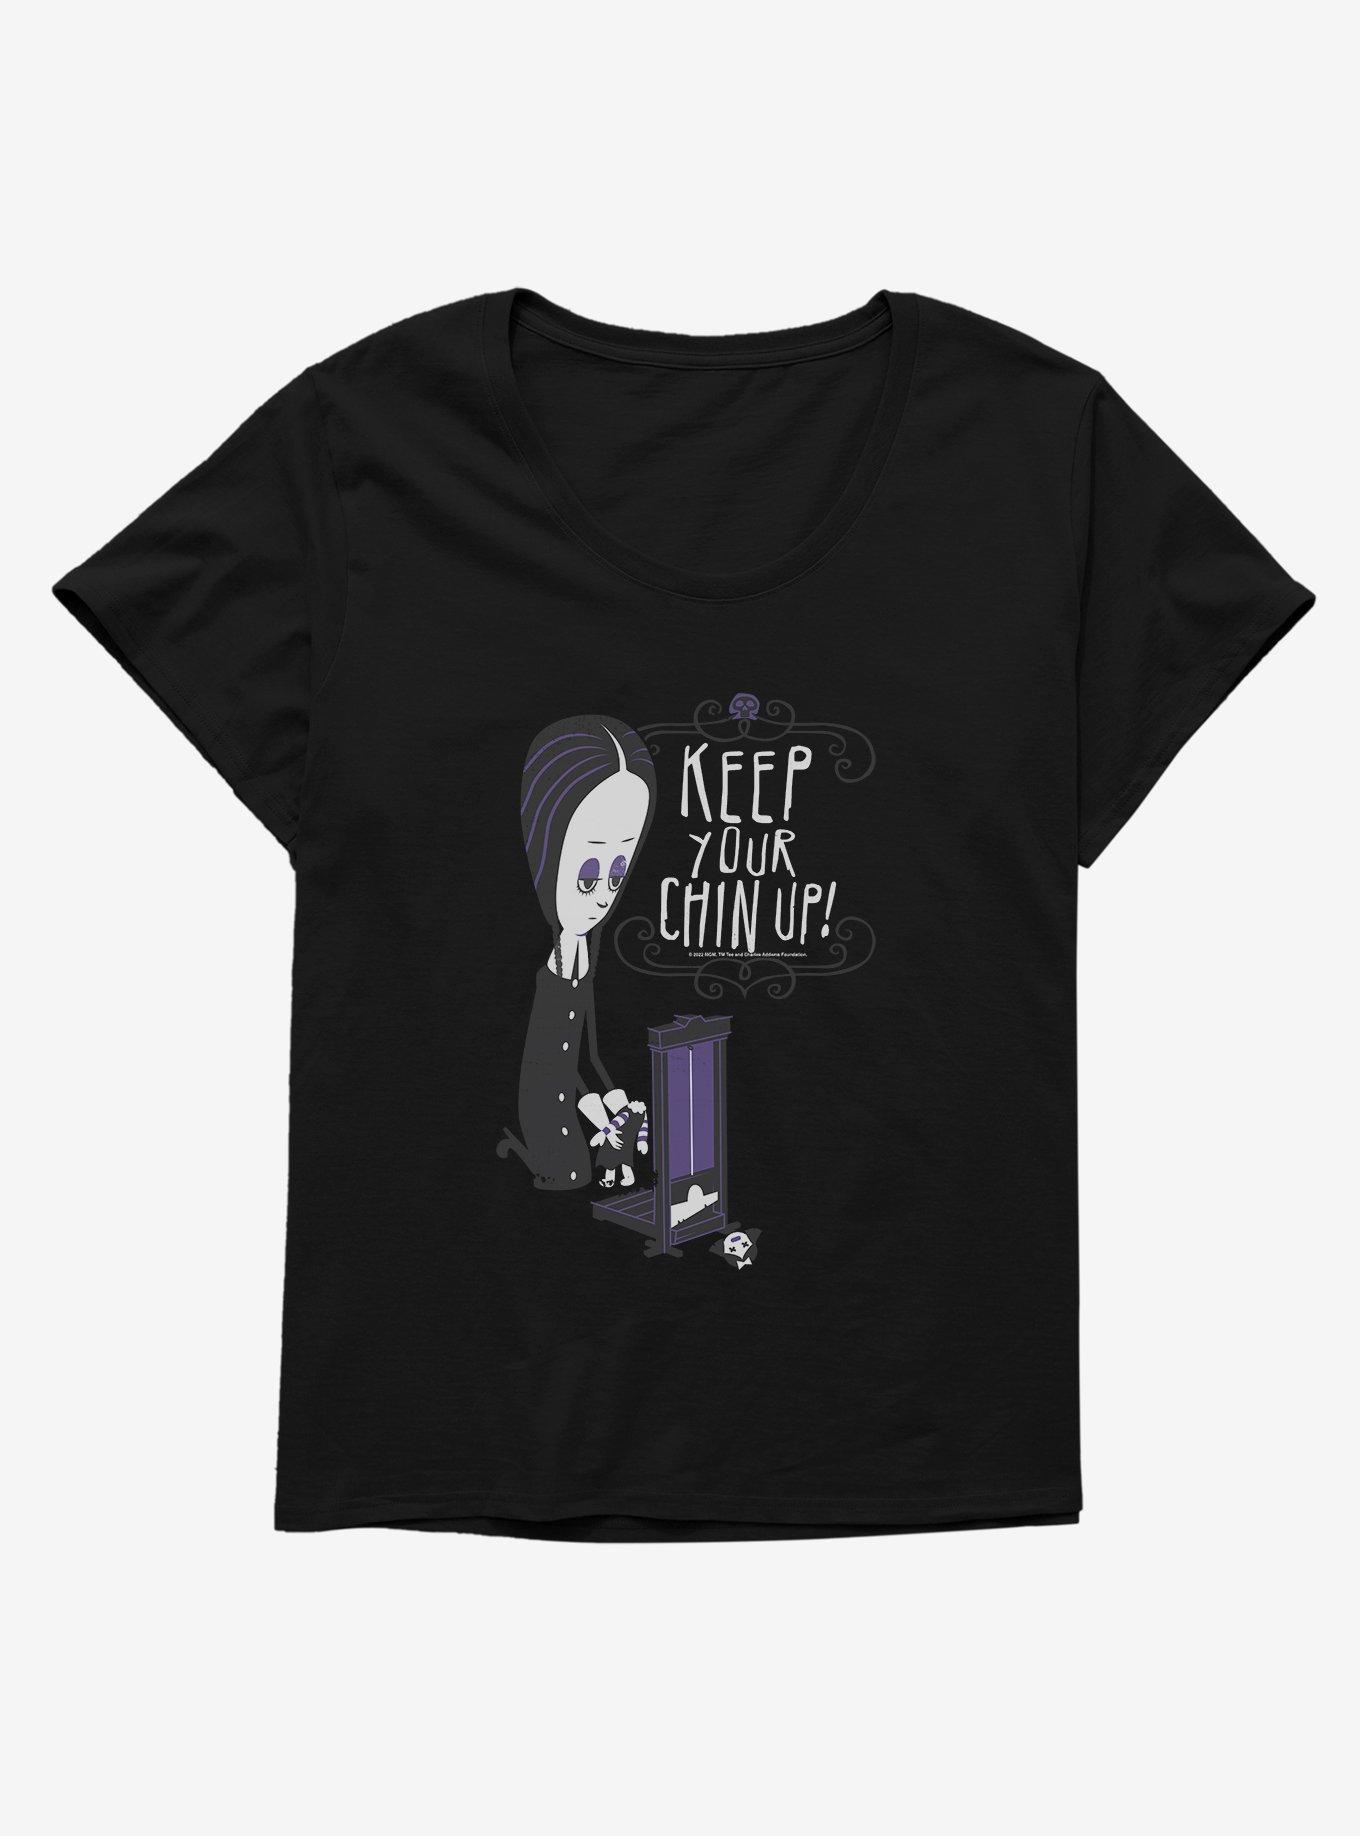 Addams Family Keep Your Chin Up! Girls T-Shirt Plus Size, BLACK, hi-res